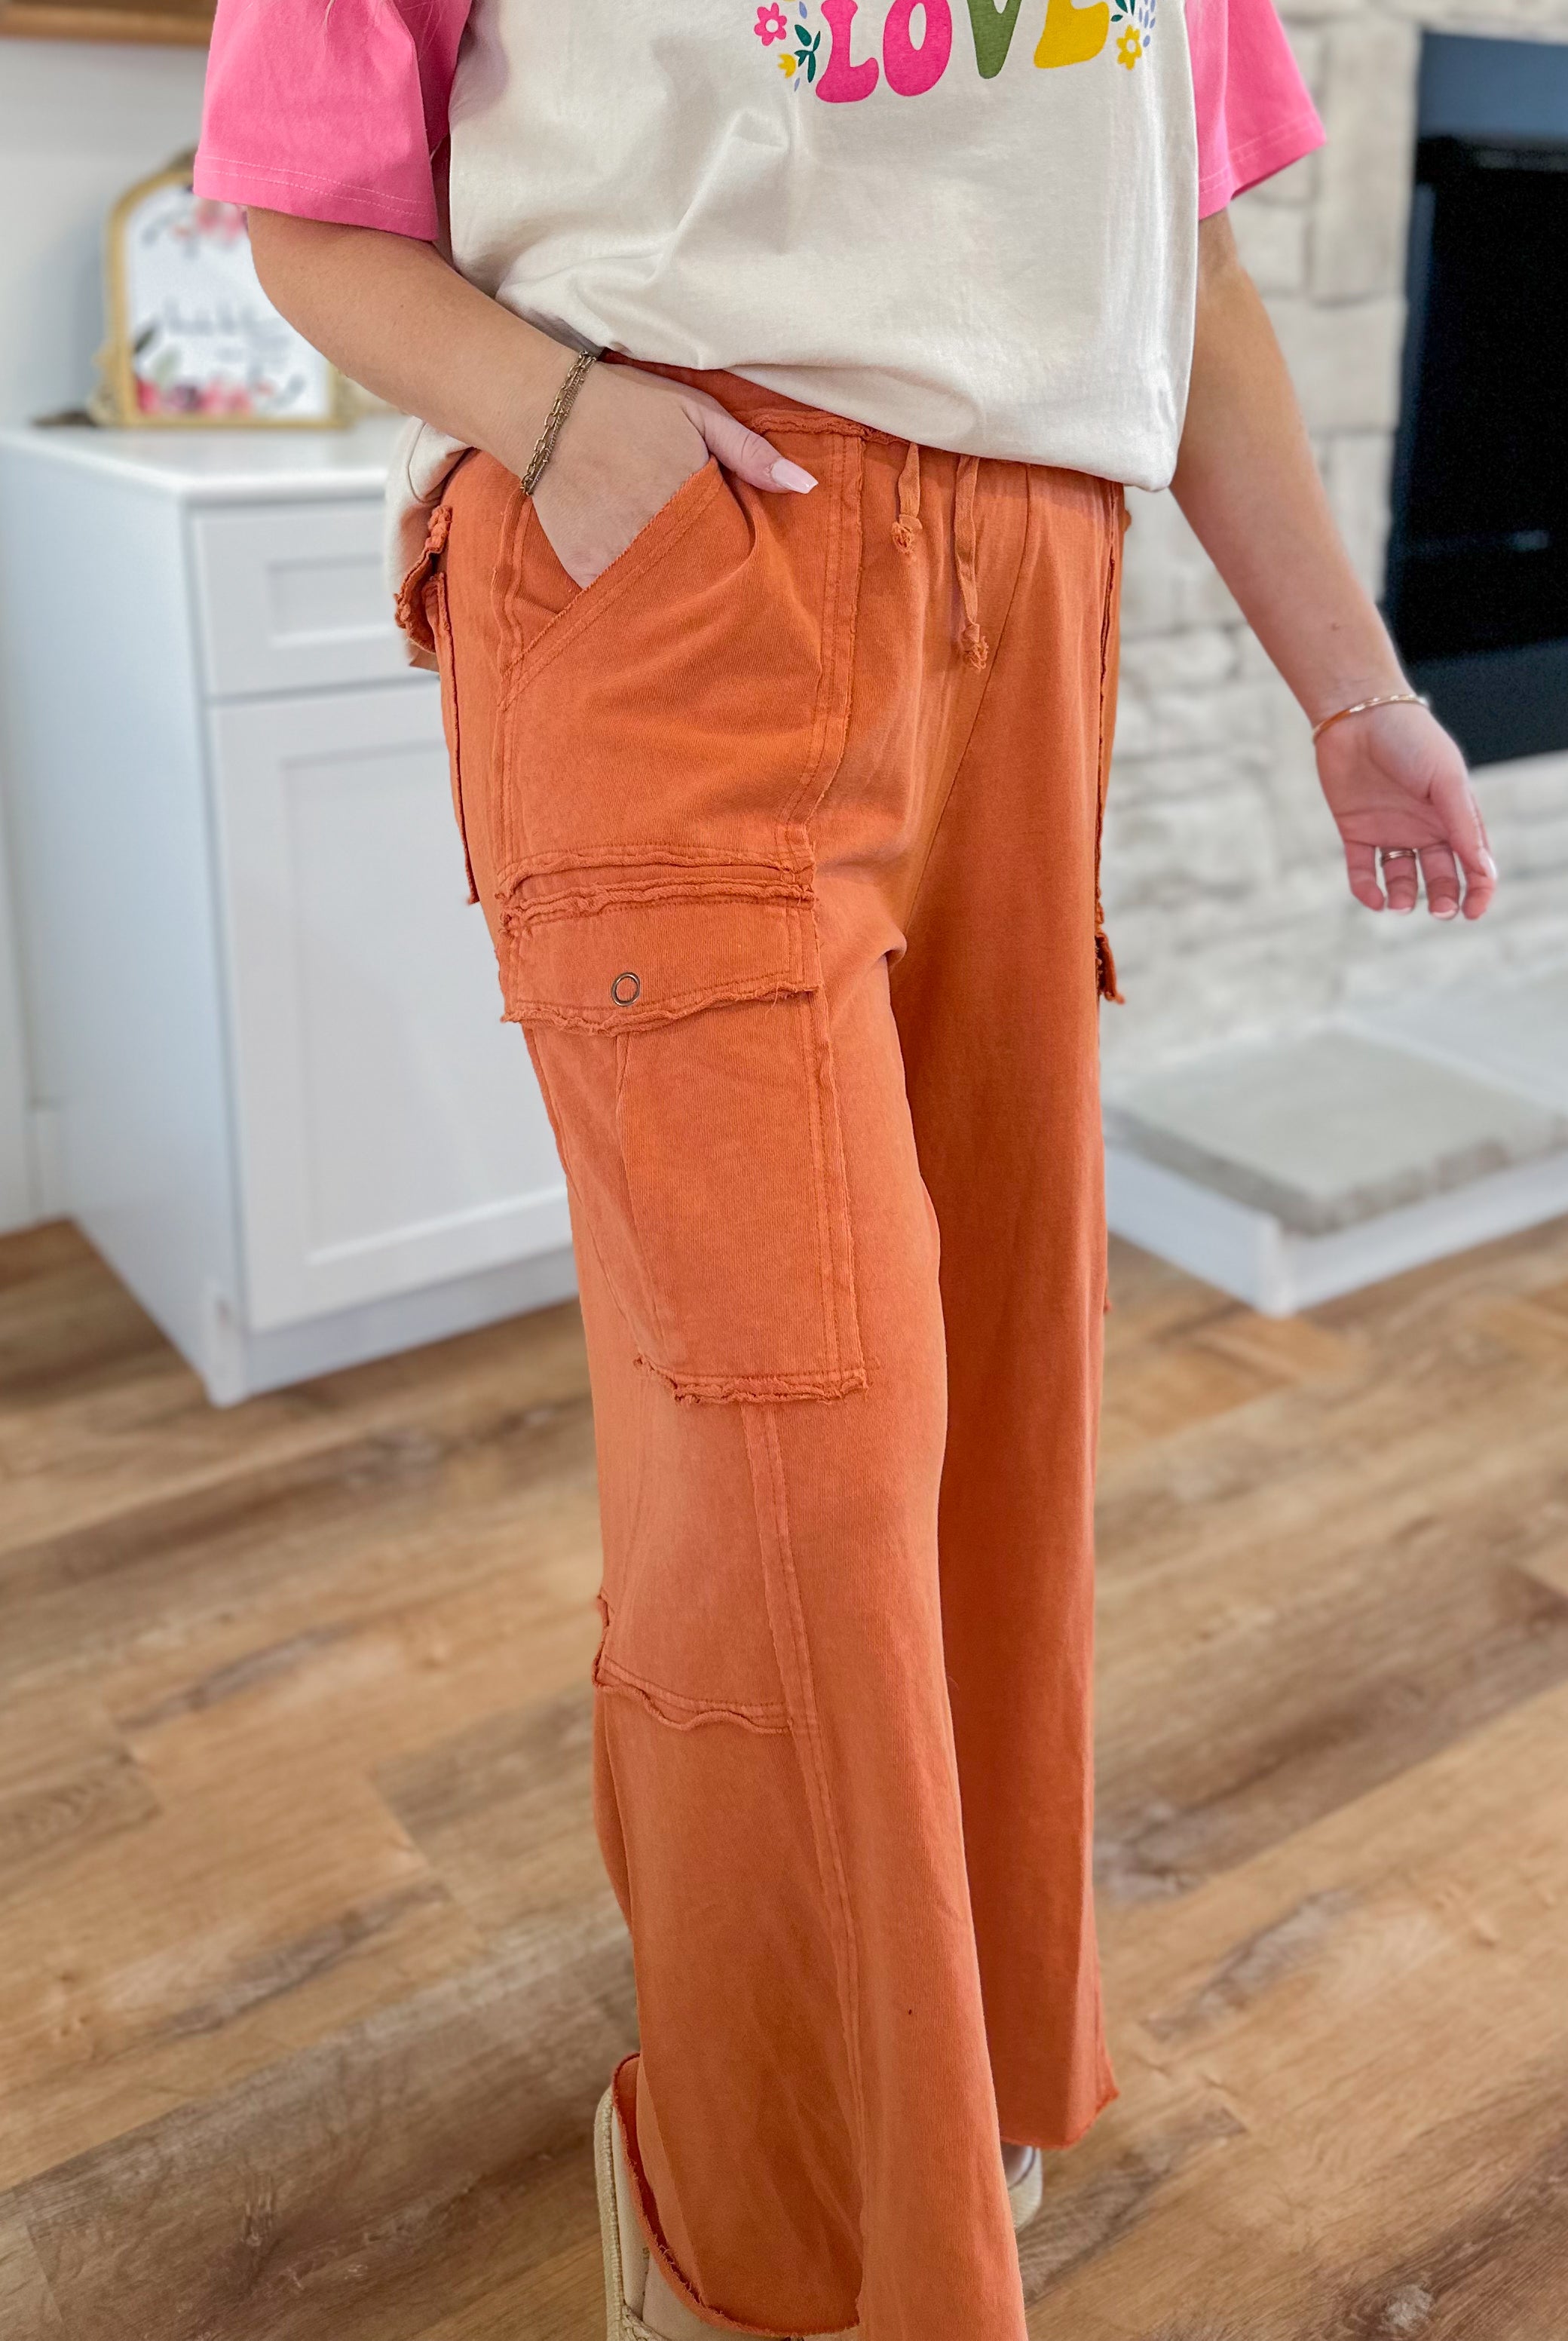 Mateo Mineral Washed Wide Leg Cargo Pants - Be You Boutique